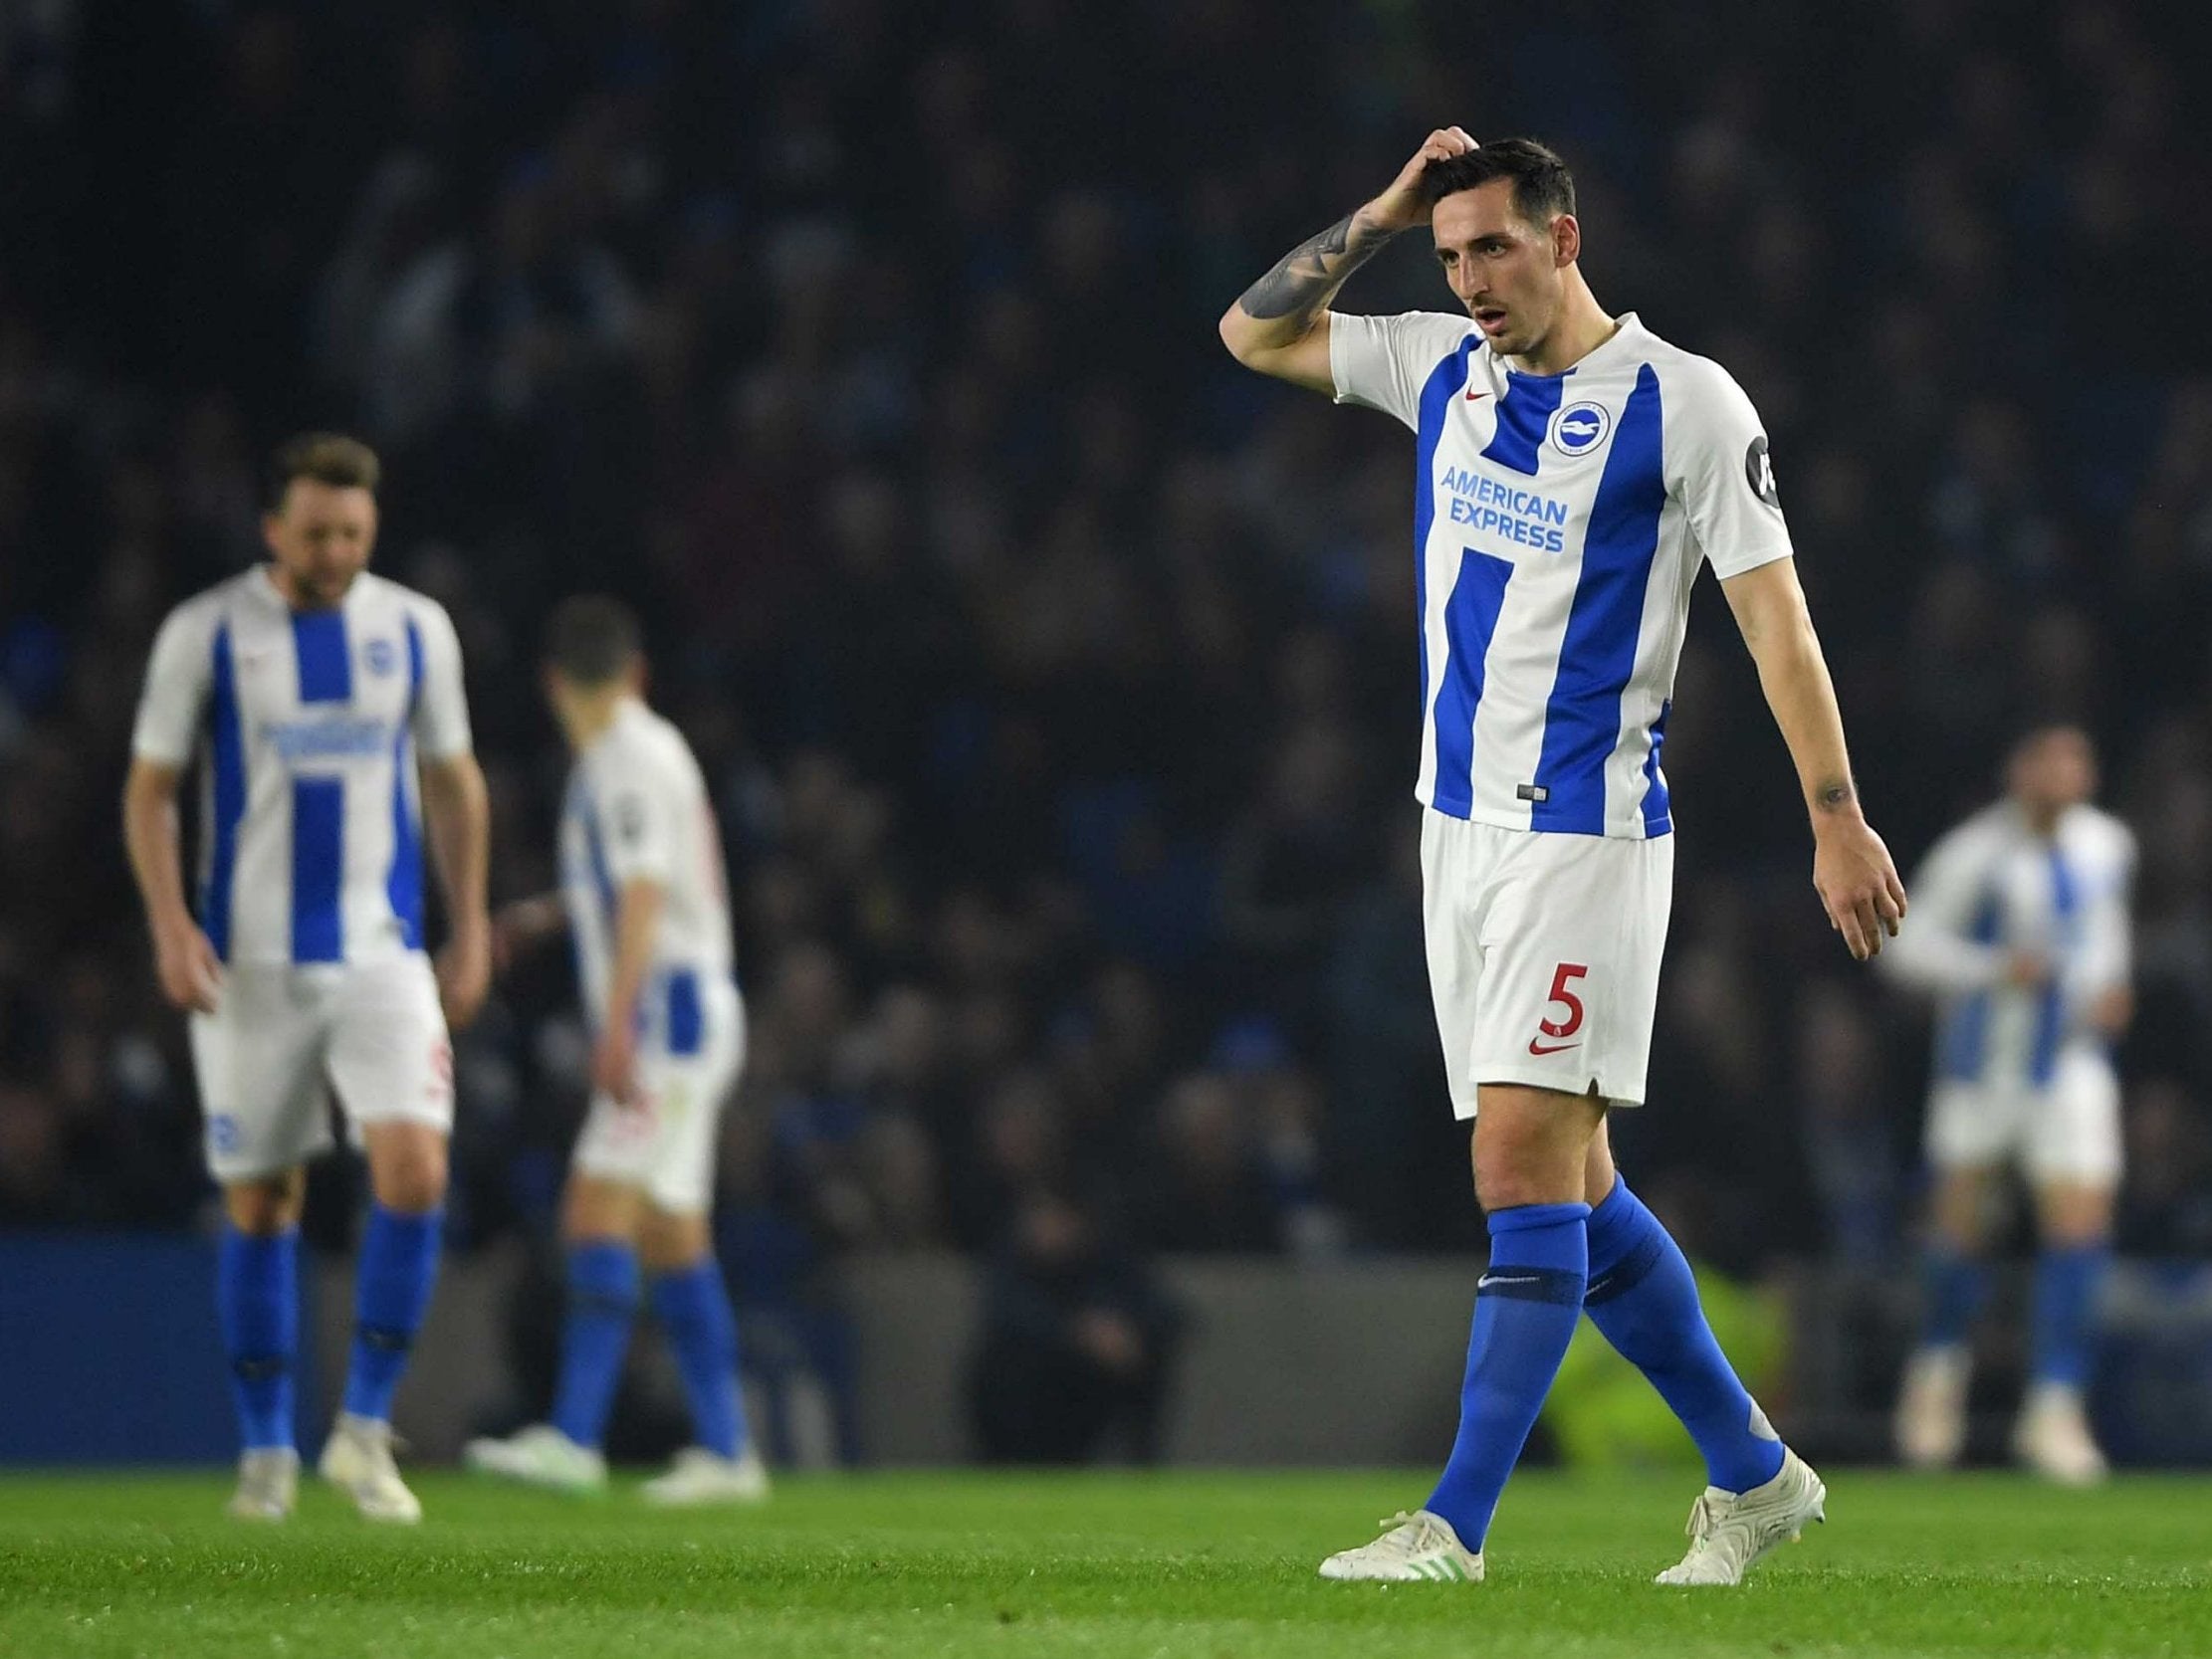 Brighton’s players leave the field dejected